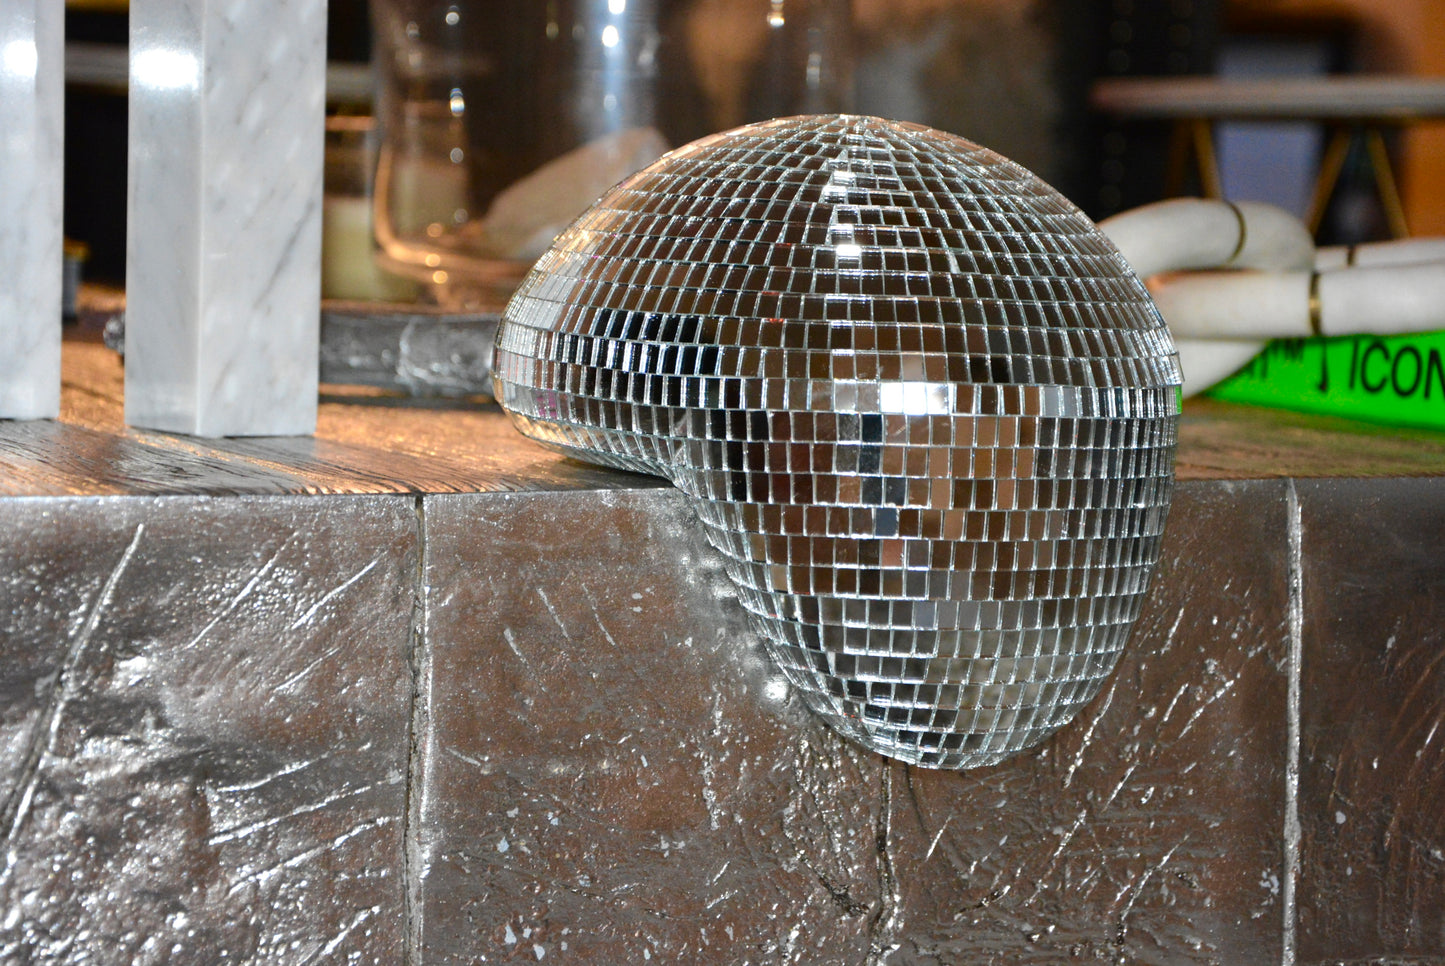 SAVAGE MELTY DISCO BALL SCULPTURE